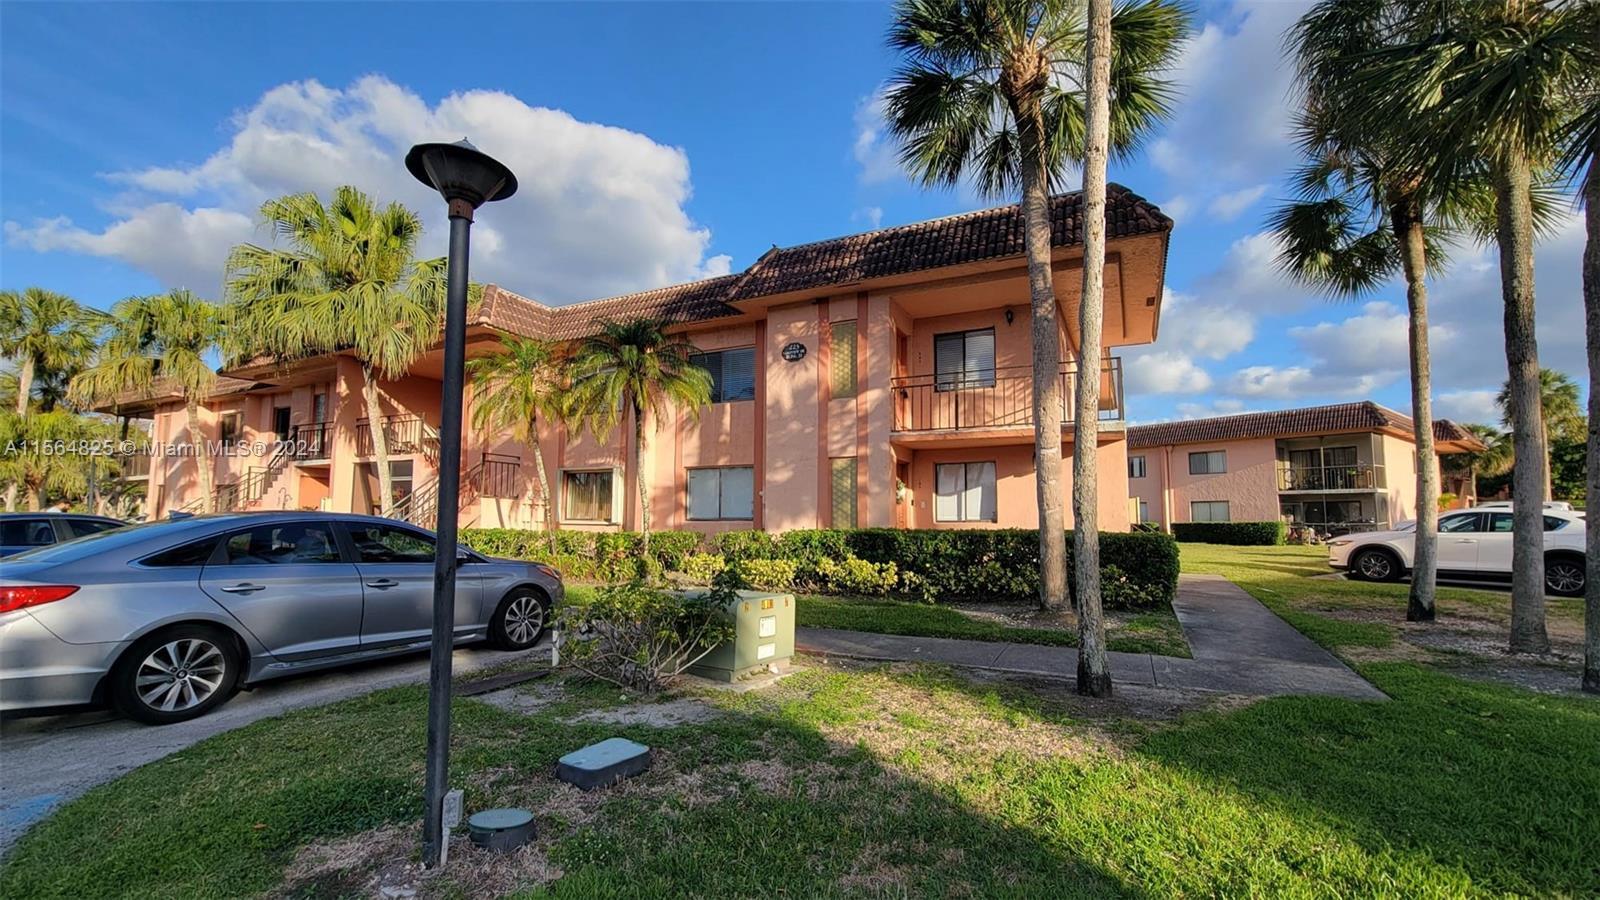 Photo of 223 Lakeview Dr #204 in Weston, FL